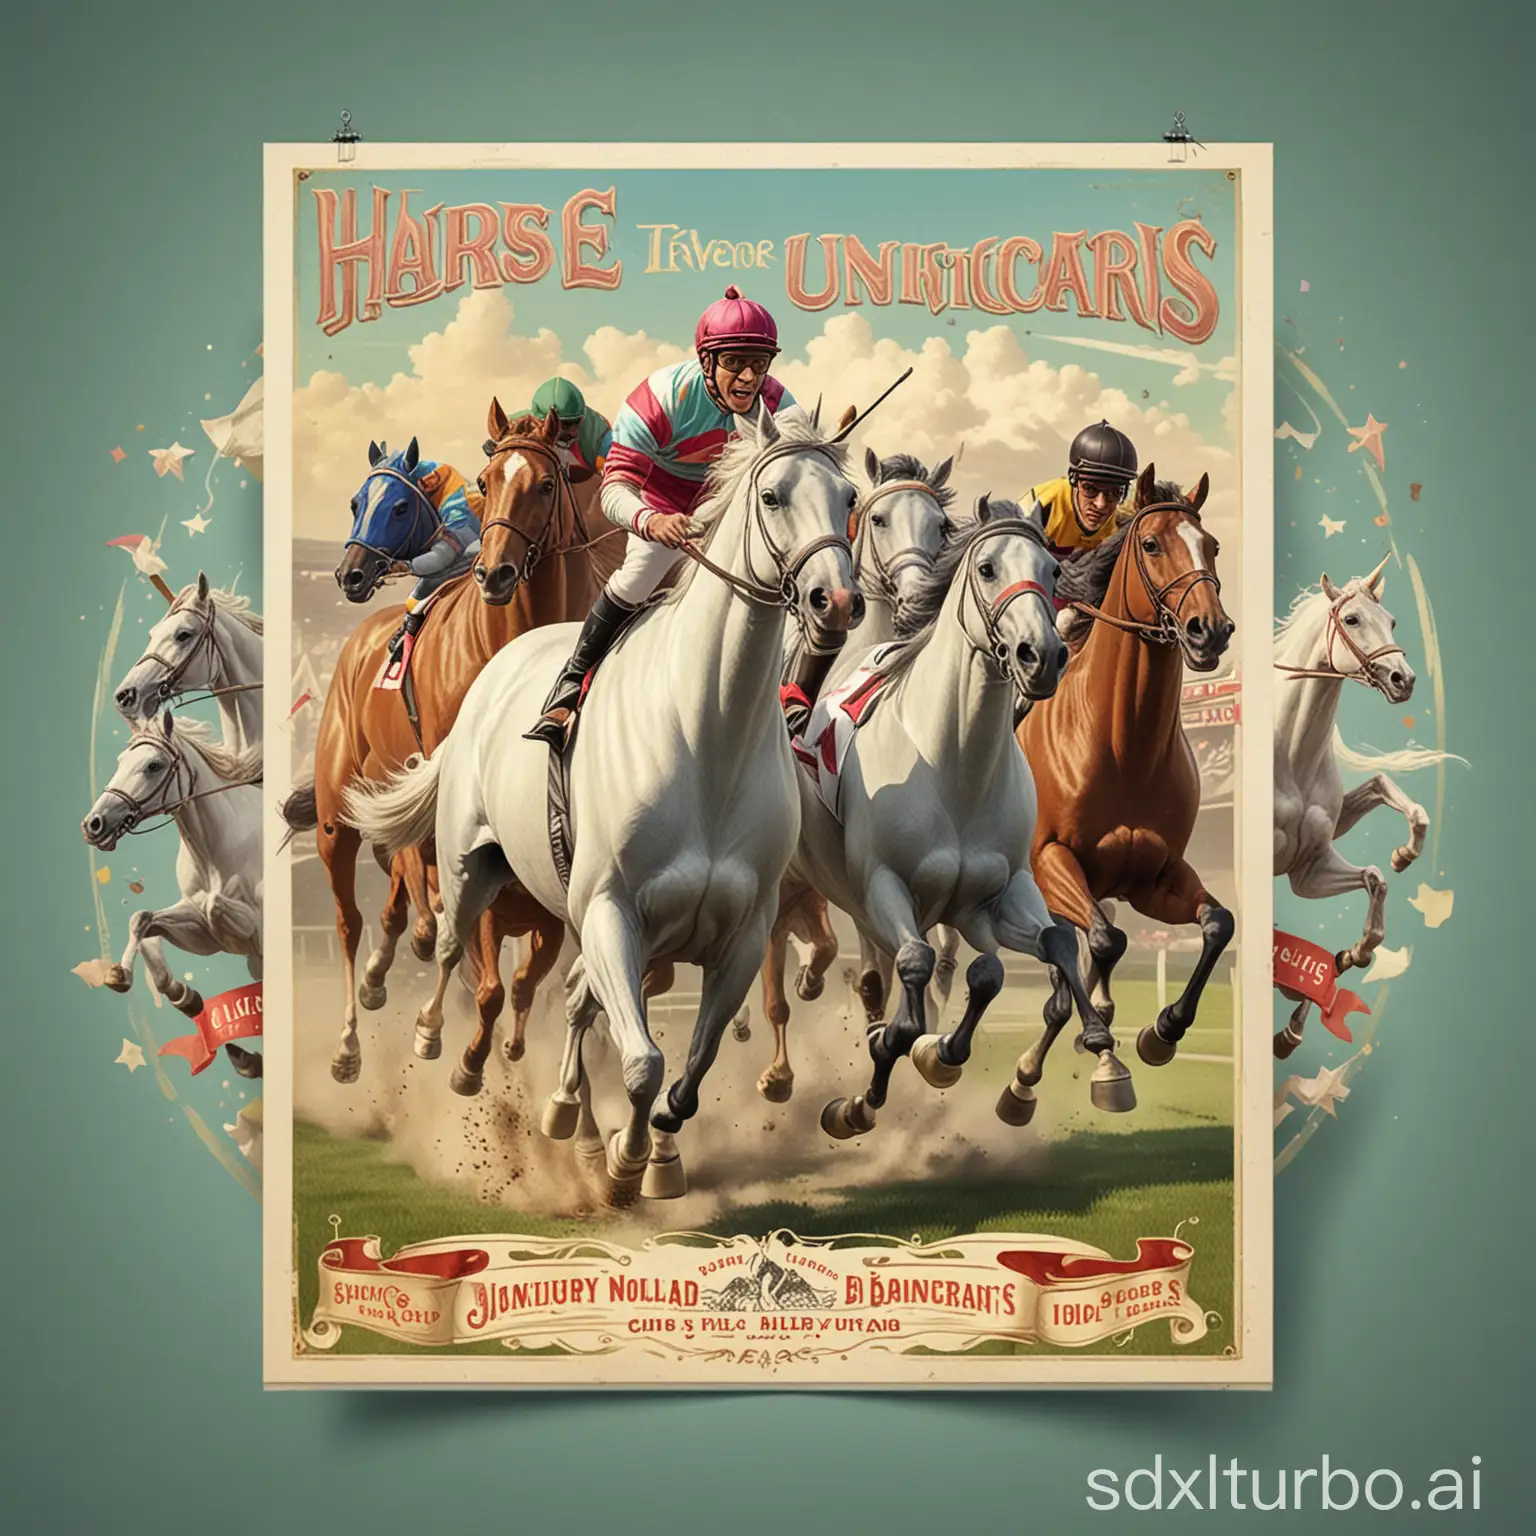 Horse racing for unicorns as advertising flyer